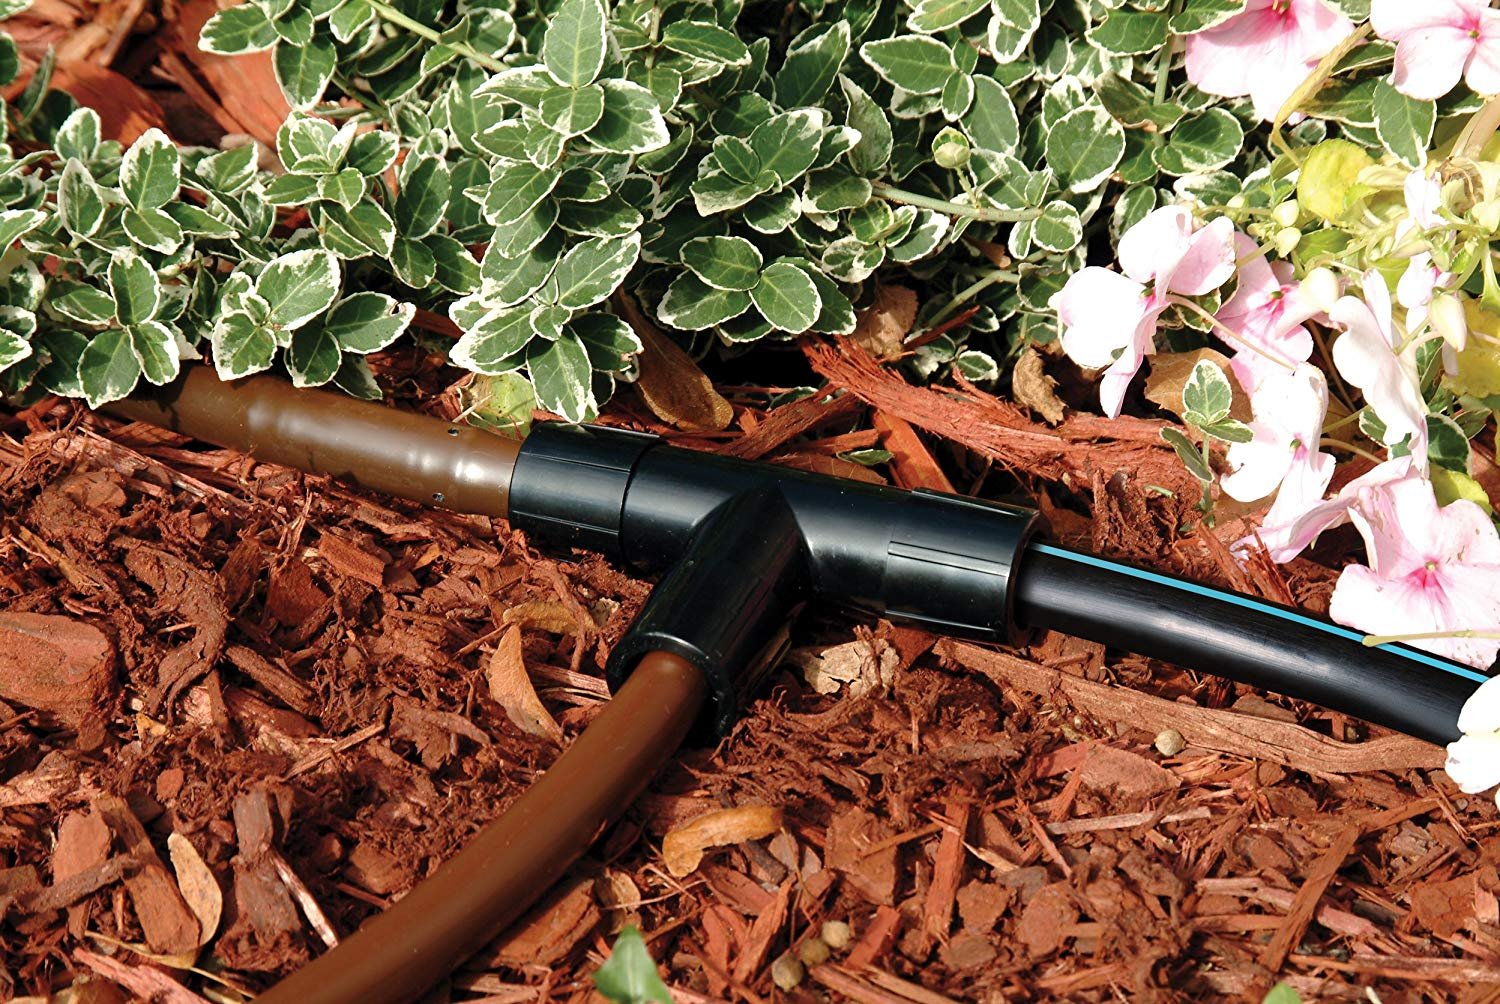 Rain Bird EFT25-1PS Drip Irrigation Easy Fit Universal Tee, Fits All 1/2" and 5/8" Tubing - image 2 of 2